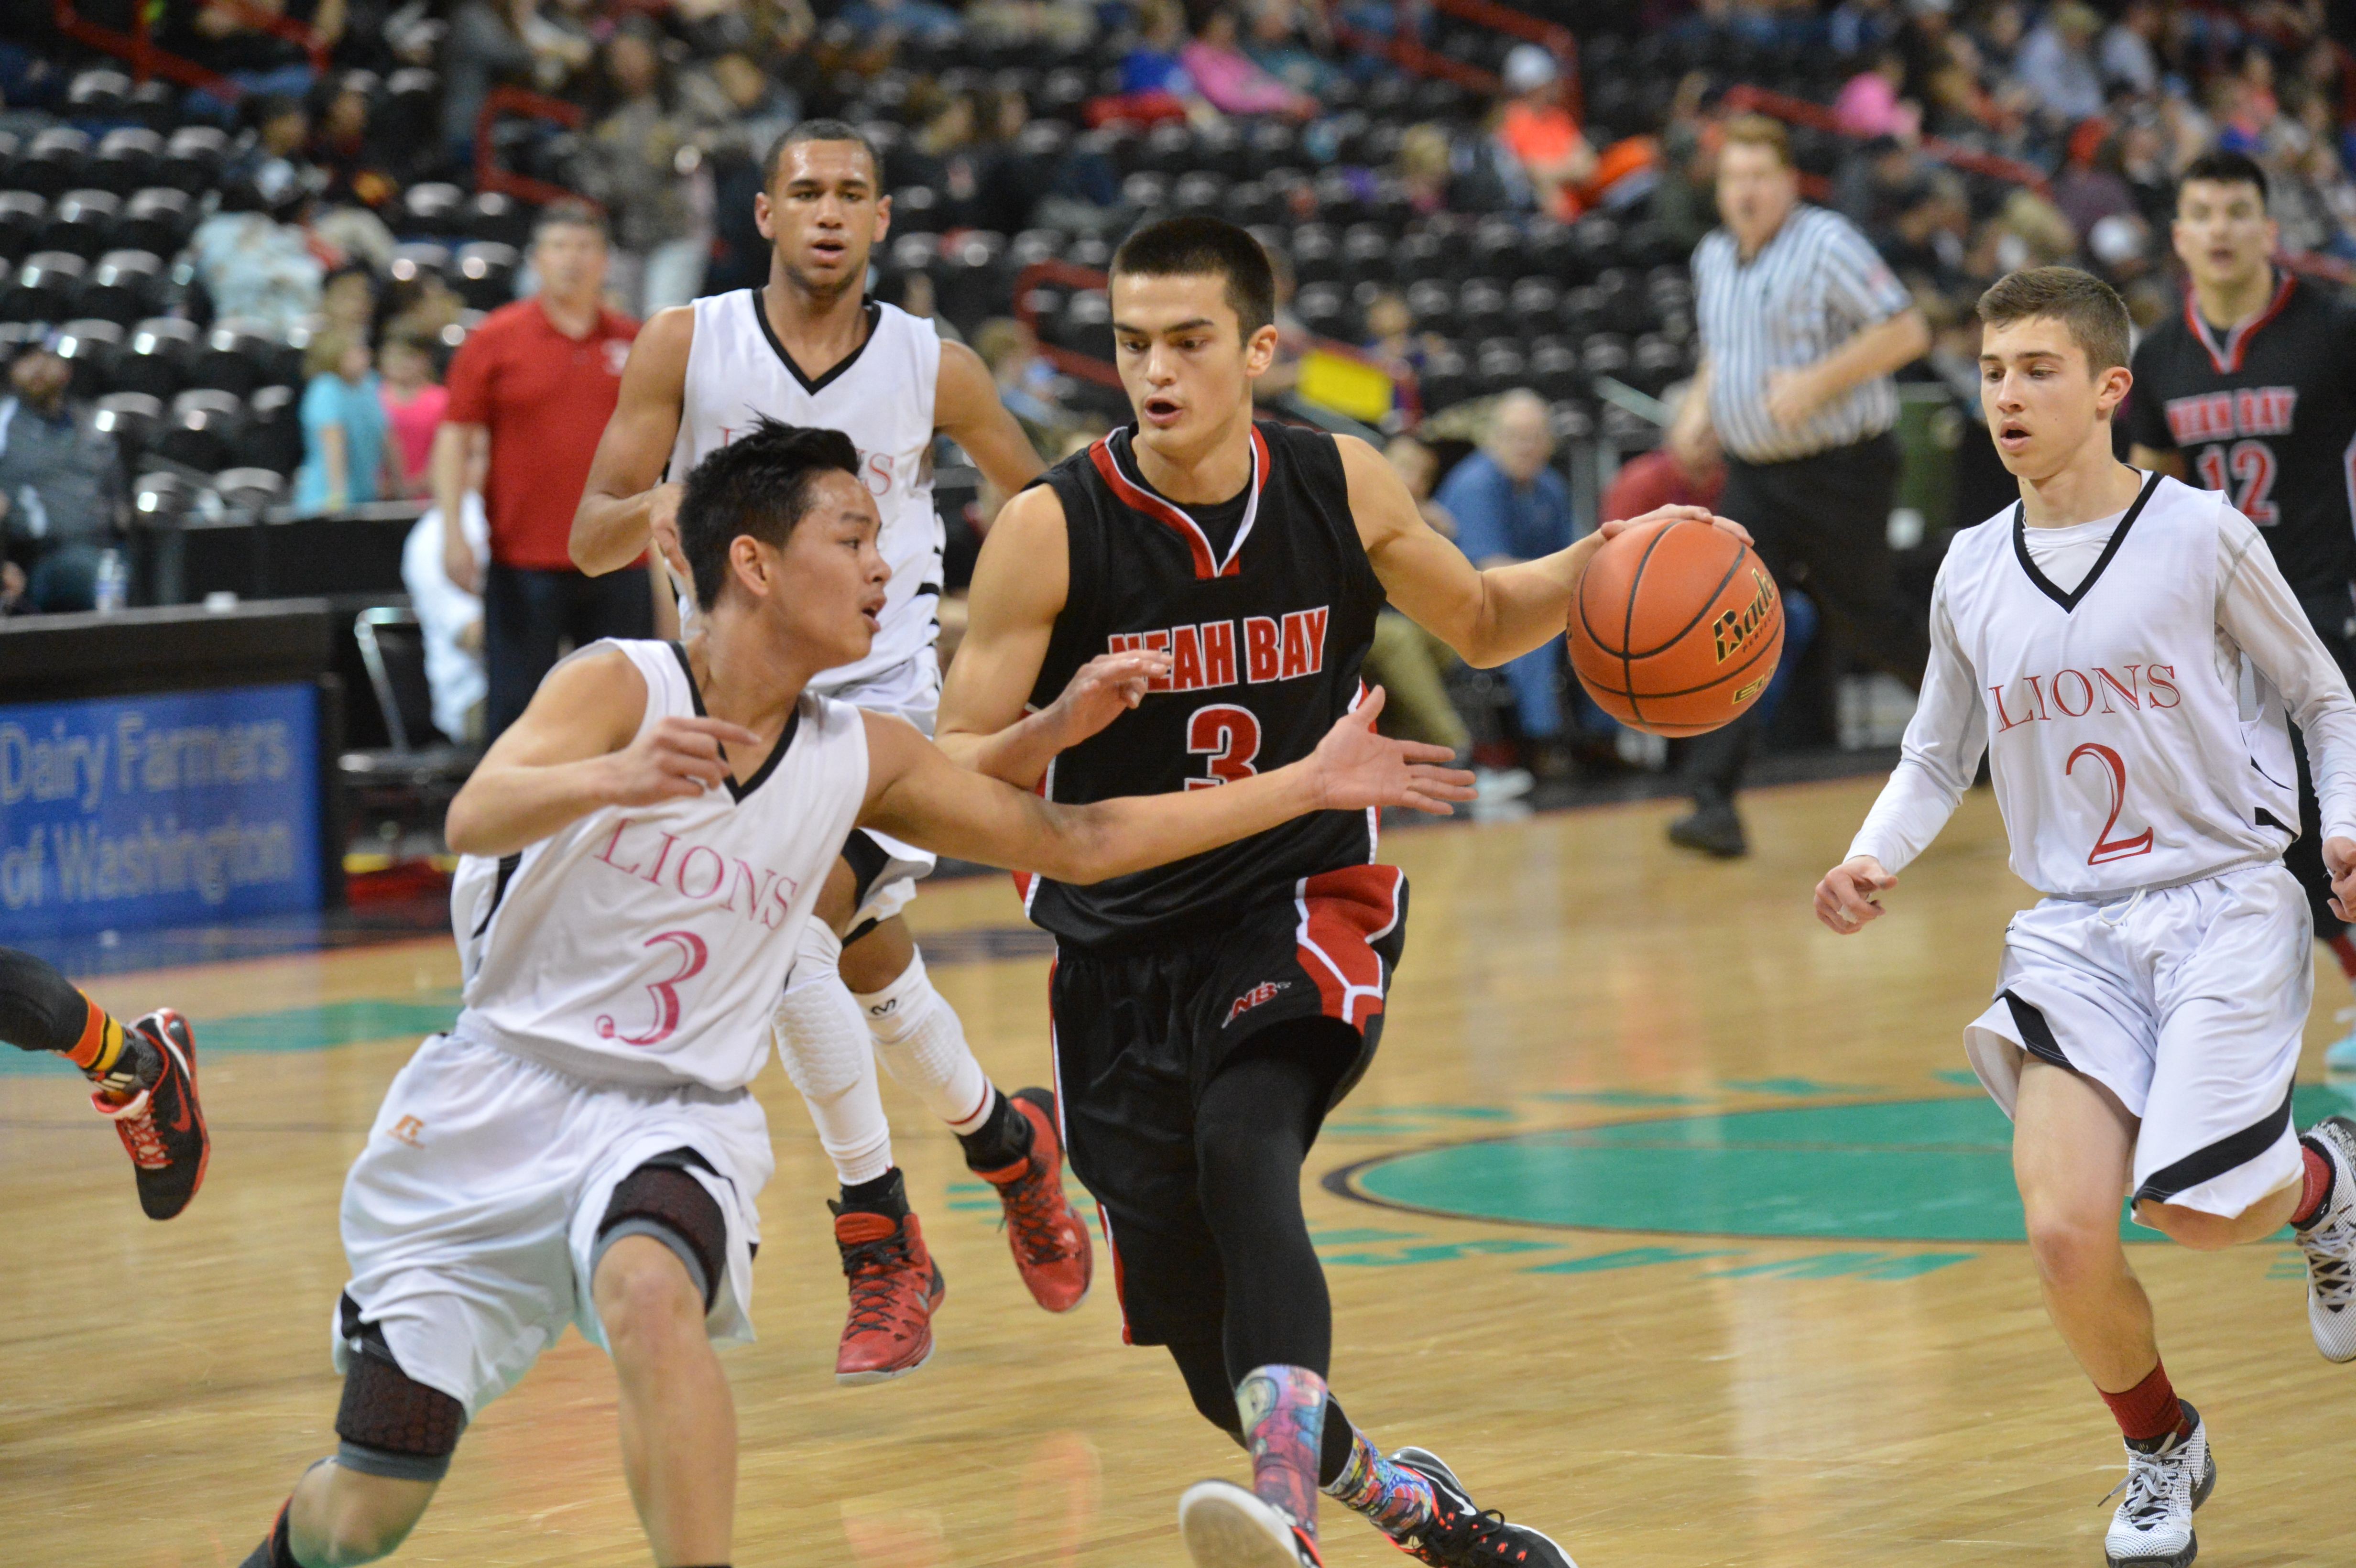 Abraham Venske of Neah Bay is guarded by Stan Domingo of Shorewood Christian in Friday's state 1B semifinal in Spokane. (Al Camp/The Omak-Okanogan County Chronicle)